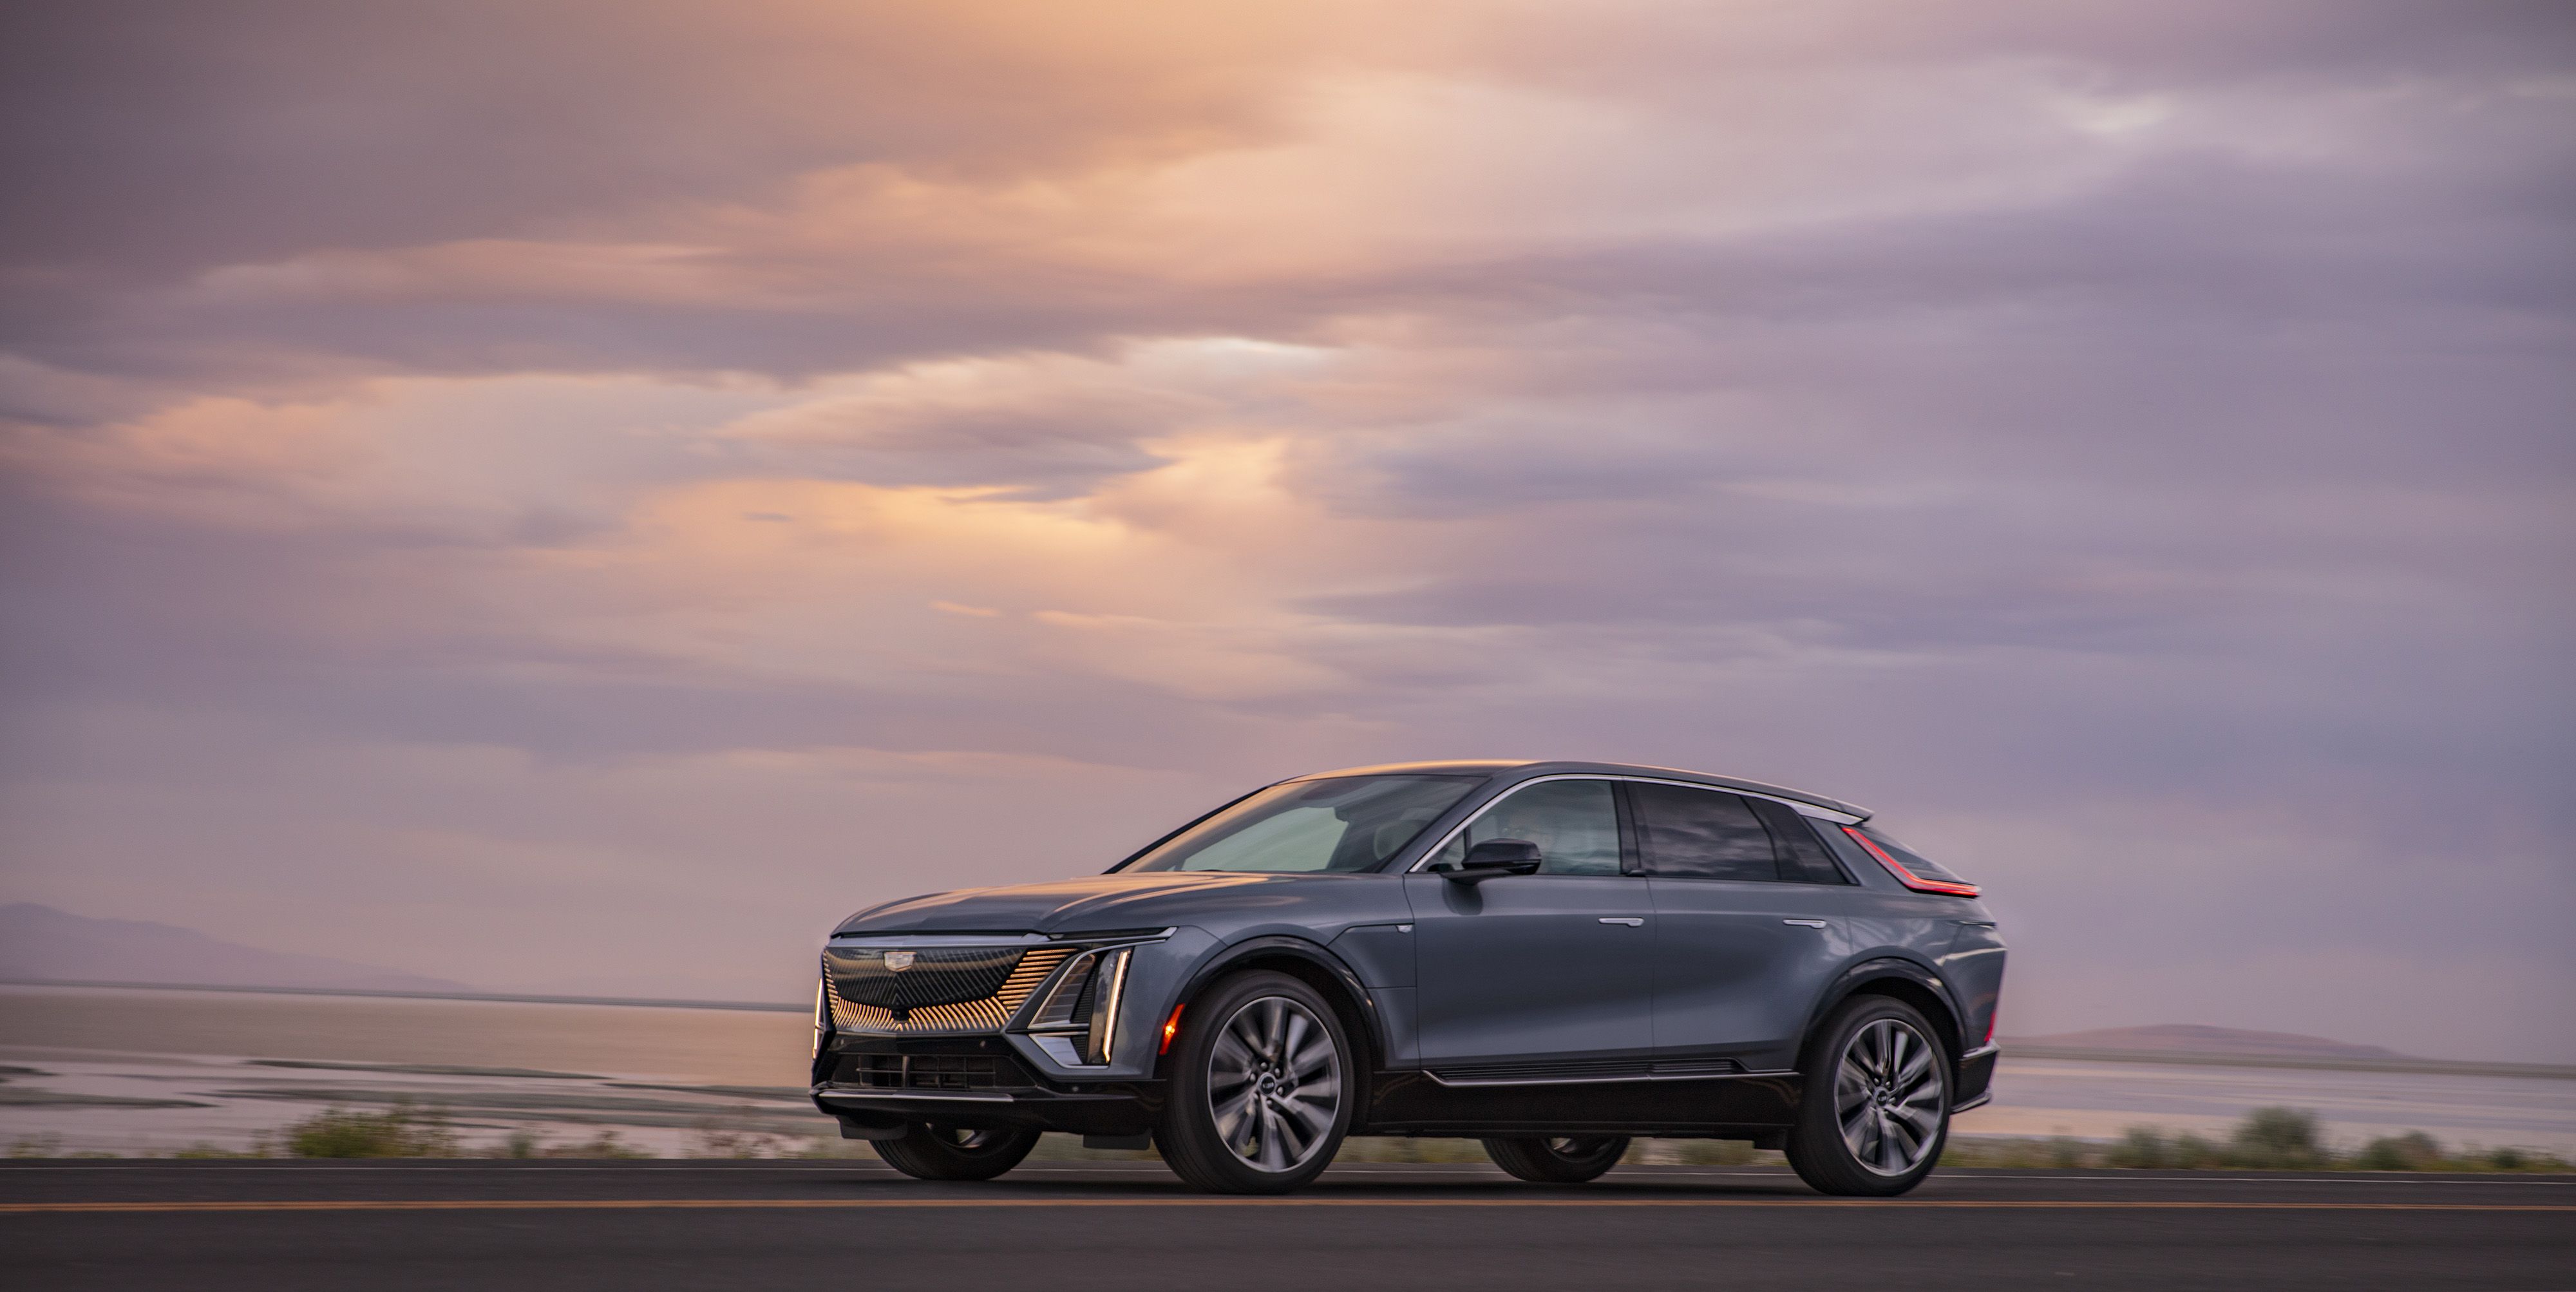 Cadillac Says It Will Debut 3 New EVs This Year